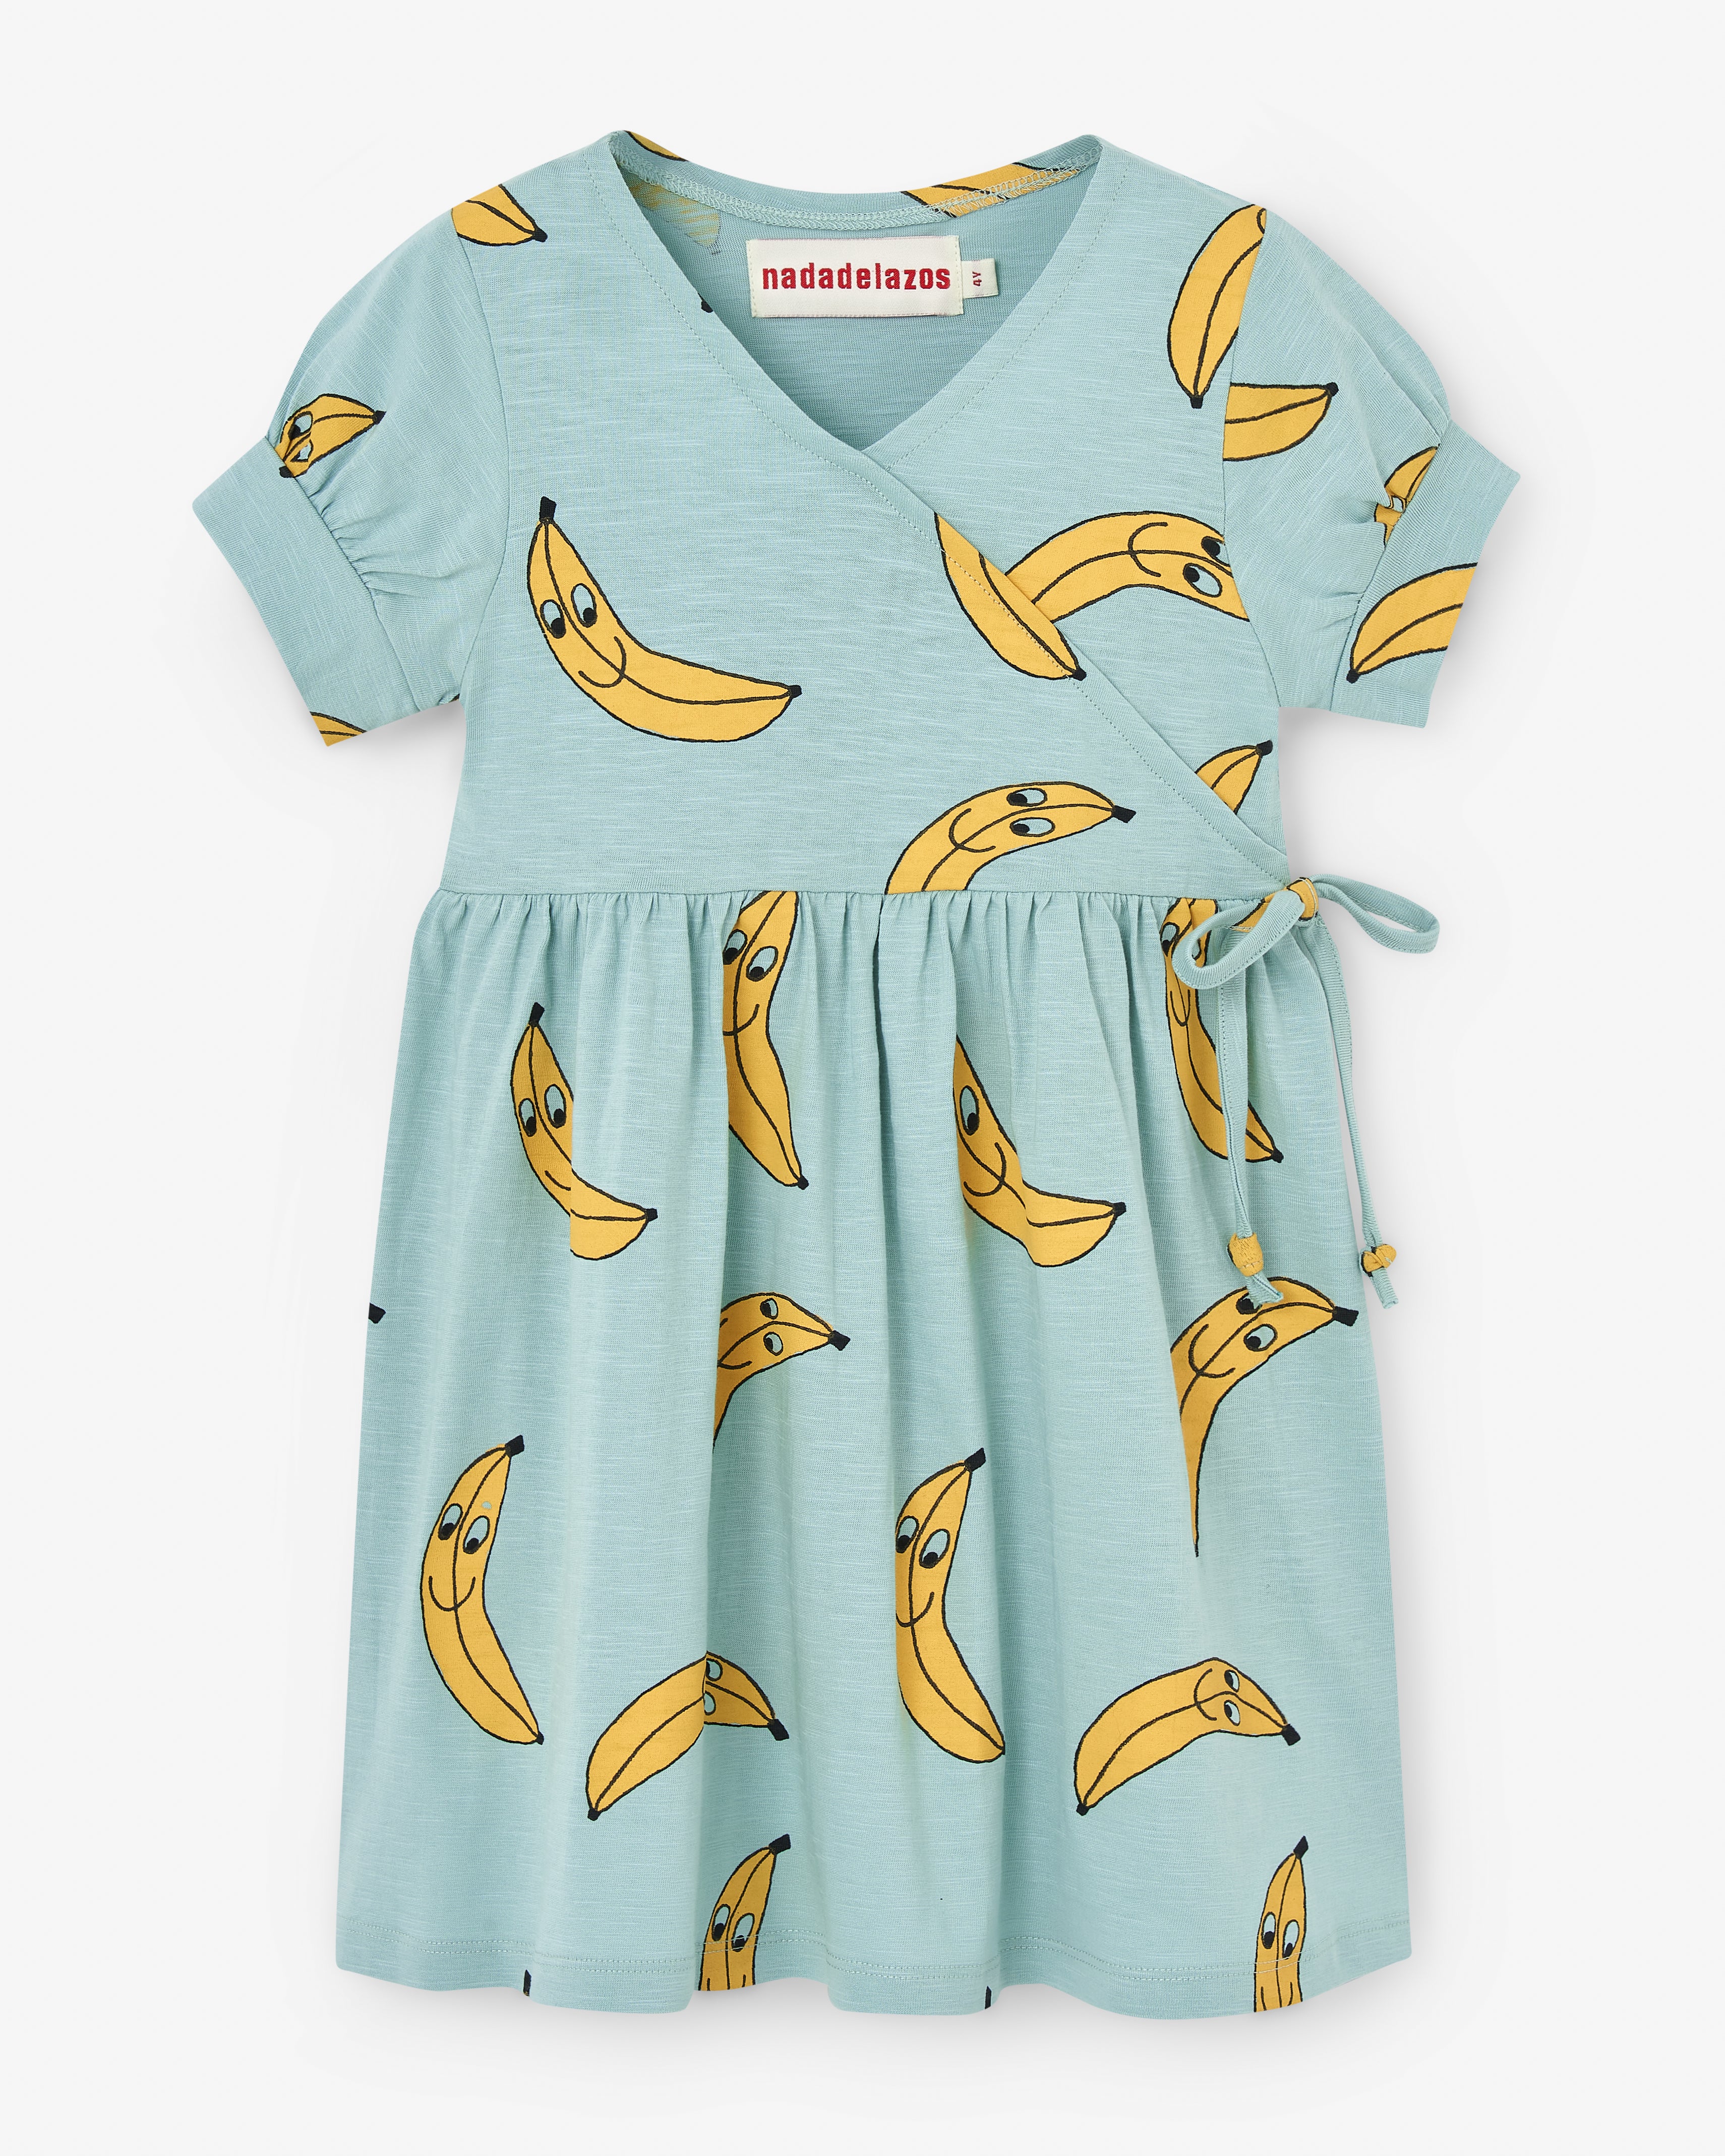 Turquoise double-breasted dress with an all-over print of yellow bananas. The wrap detail is fixed and makes the dress very comfy to put on and off. 100% certified organic cotton. 100% pollution-free water print. Made by Nadadelazos